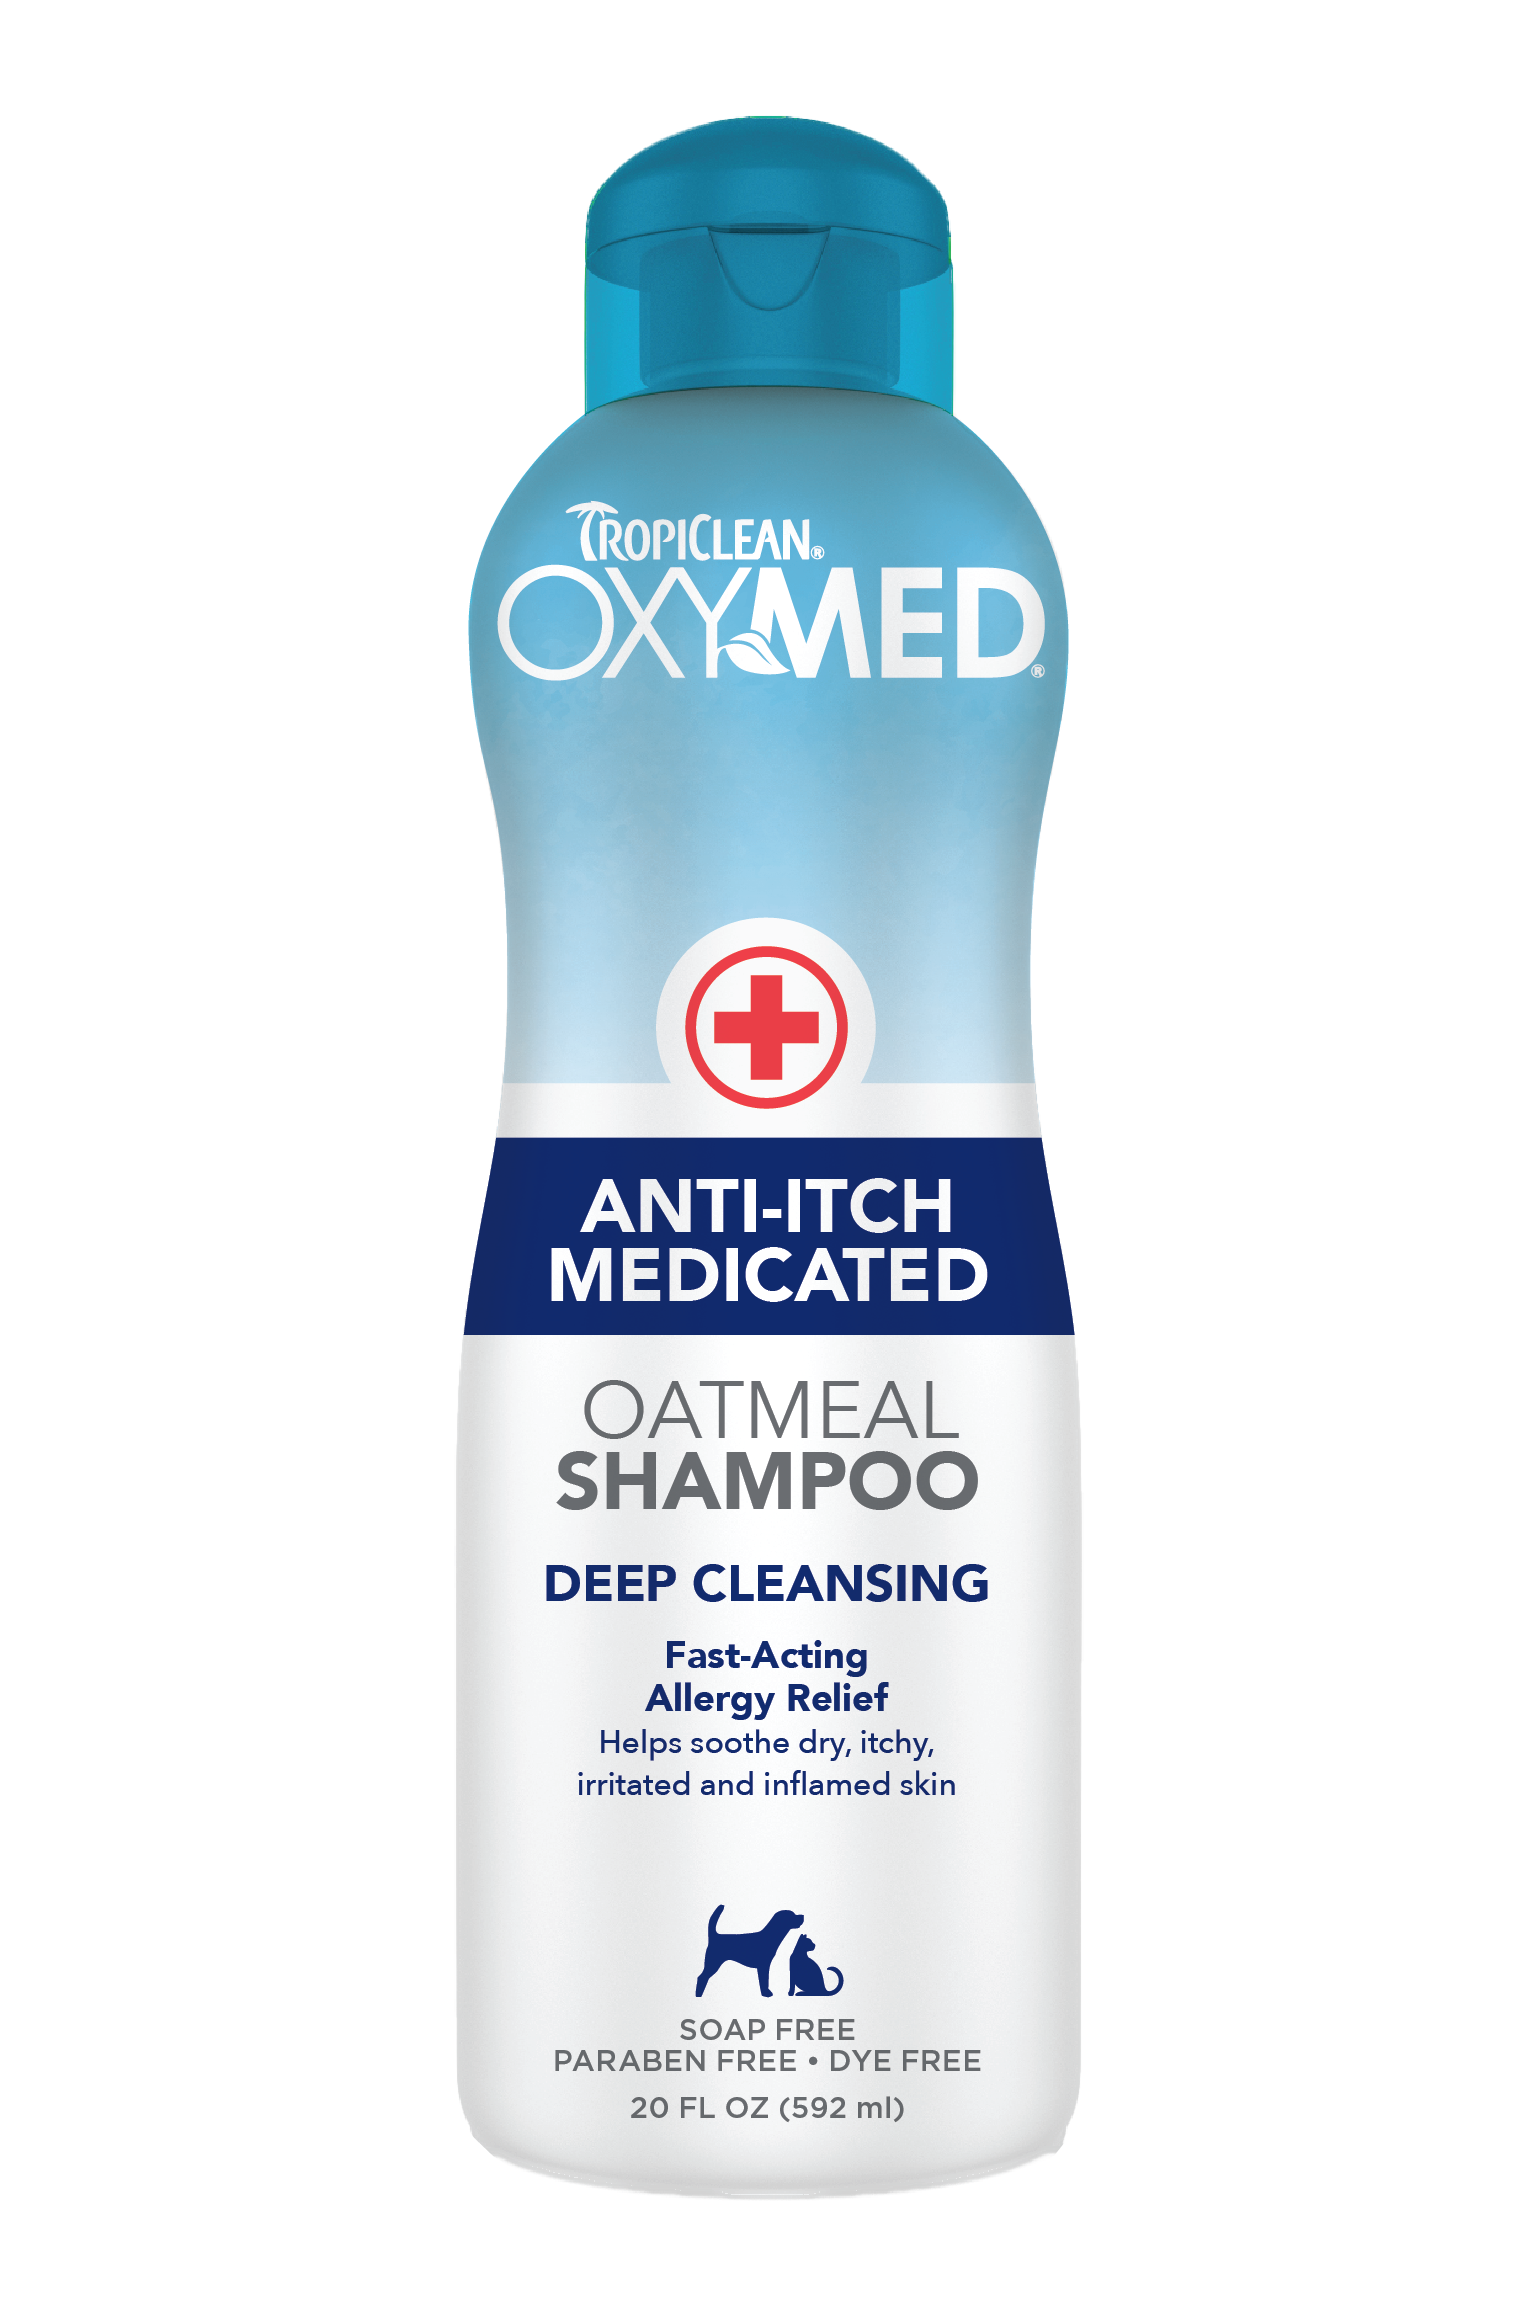 Tropiclean Oxymed Anti-Itch Medicated Deep Cleansing Shampoo